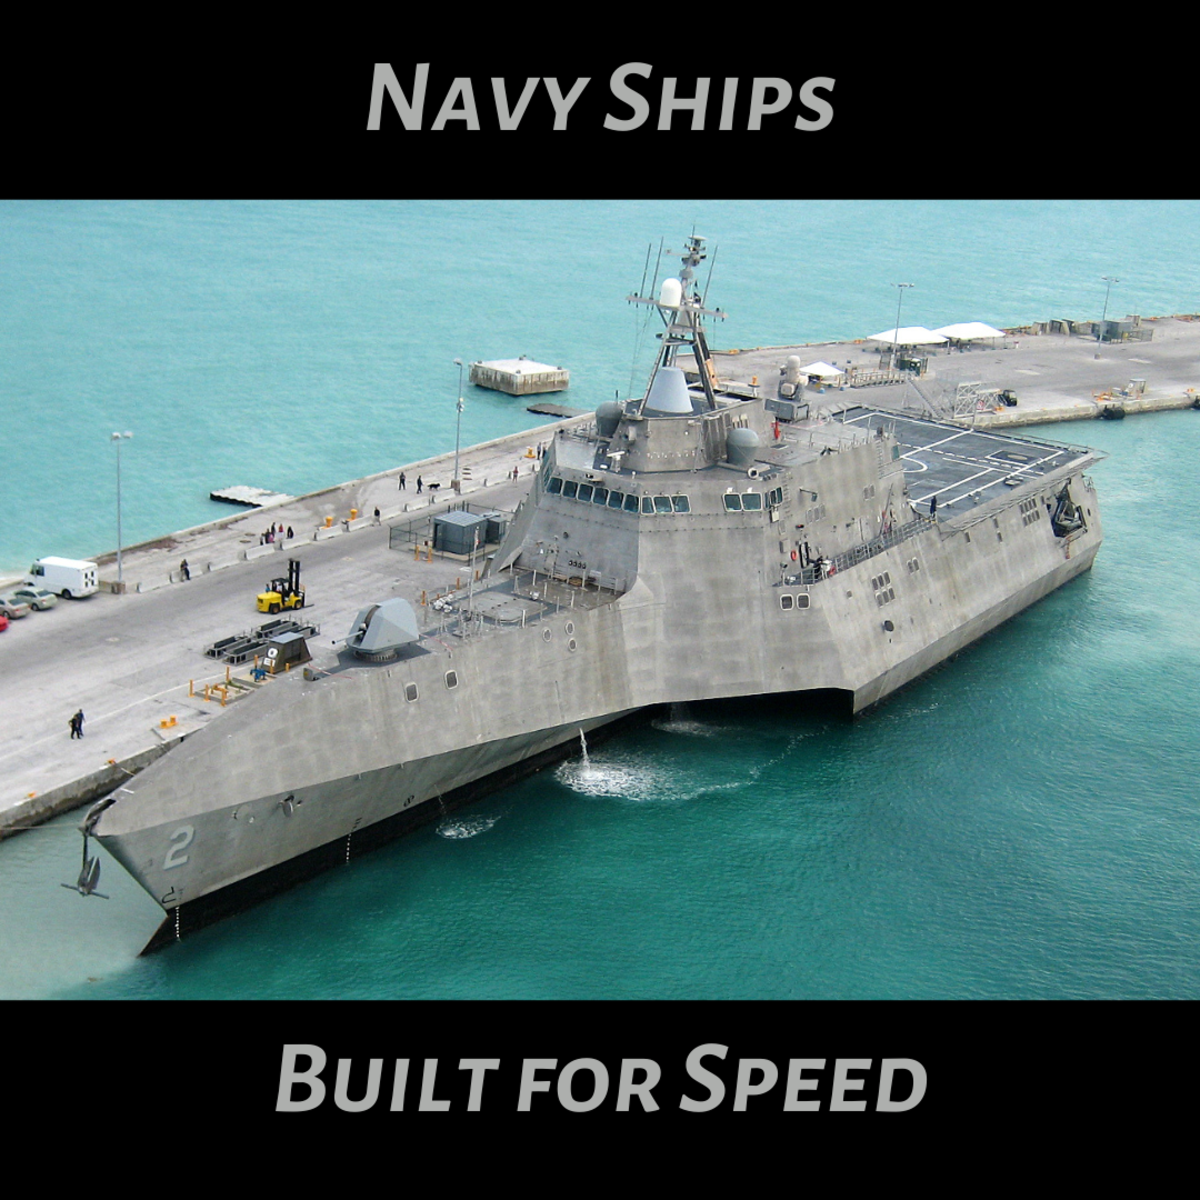 USS Independence (LCS-2) at Naval Air Station Key West on March 29, 2010